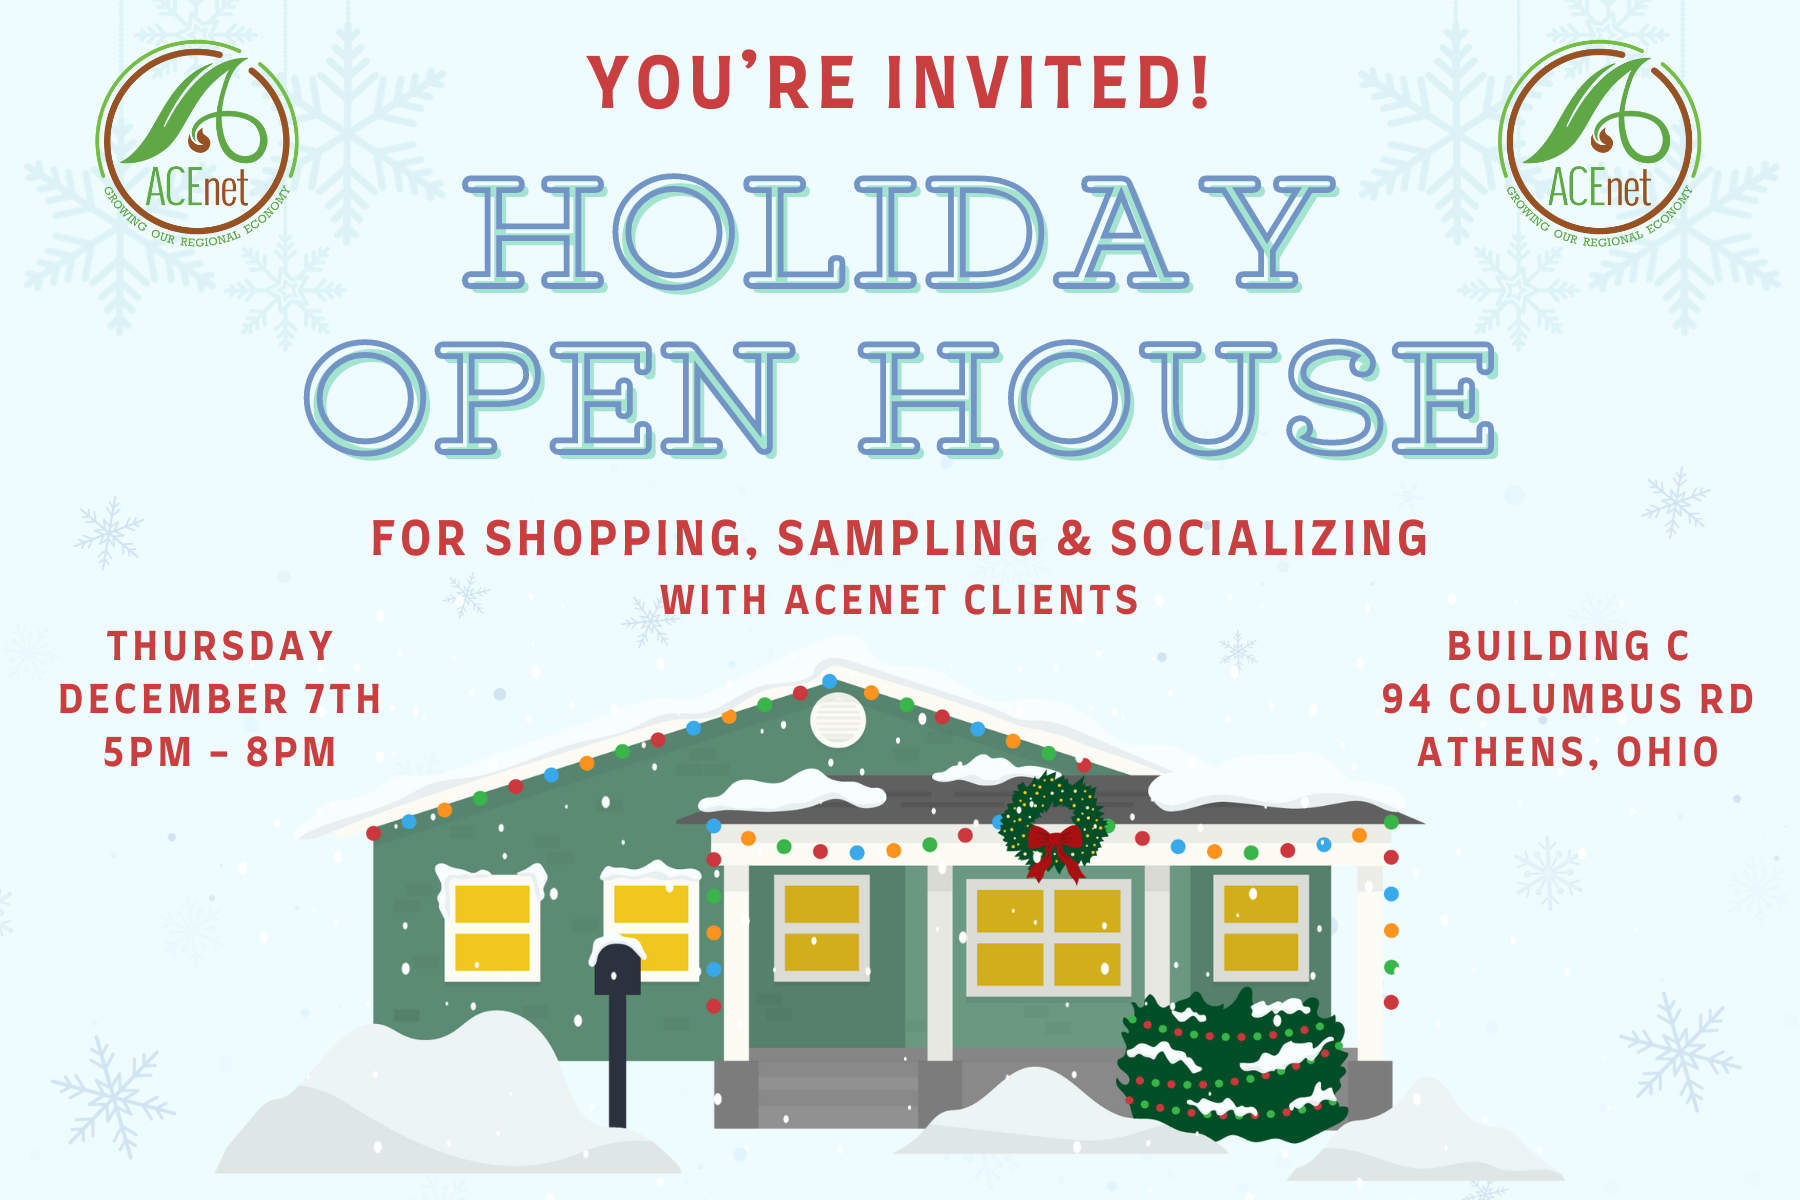 A flyer for ACEnet's Holiday Open House